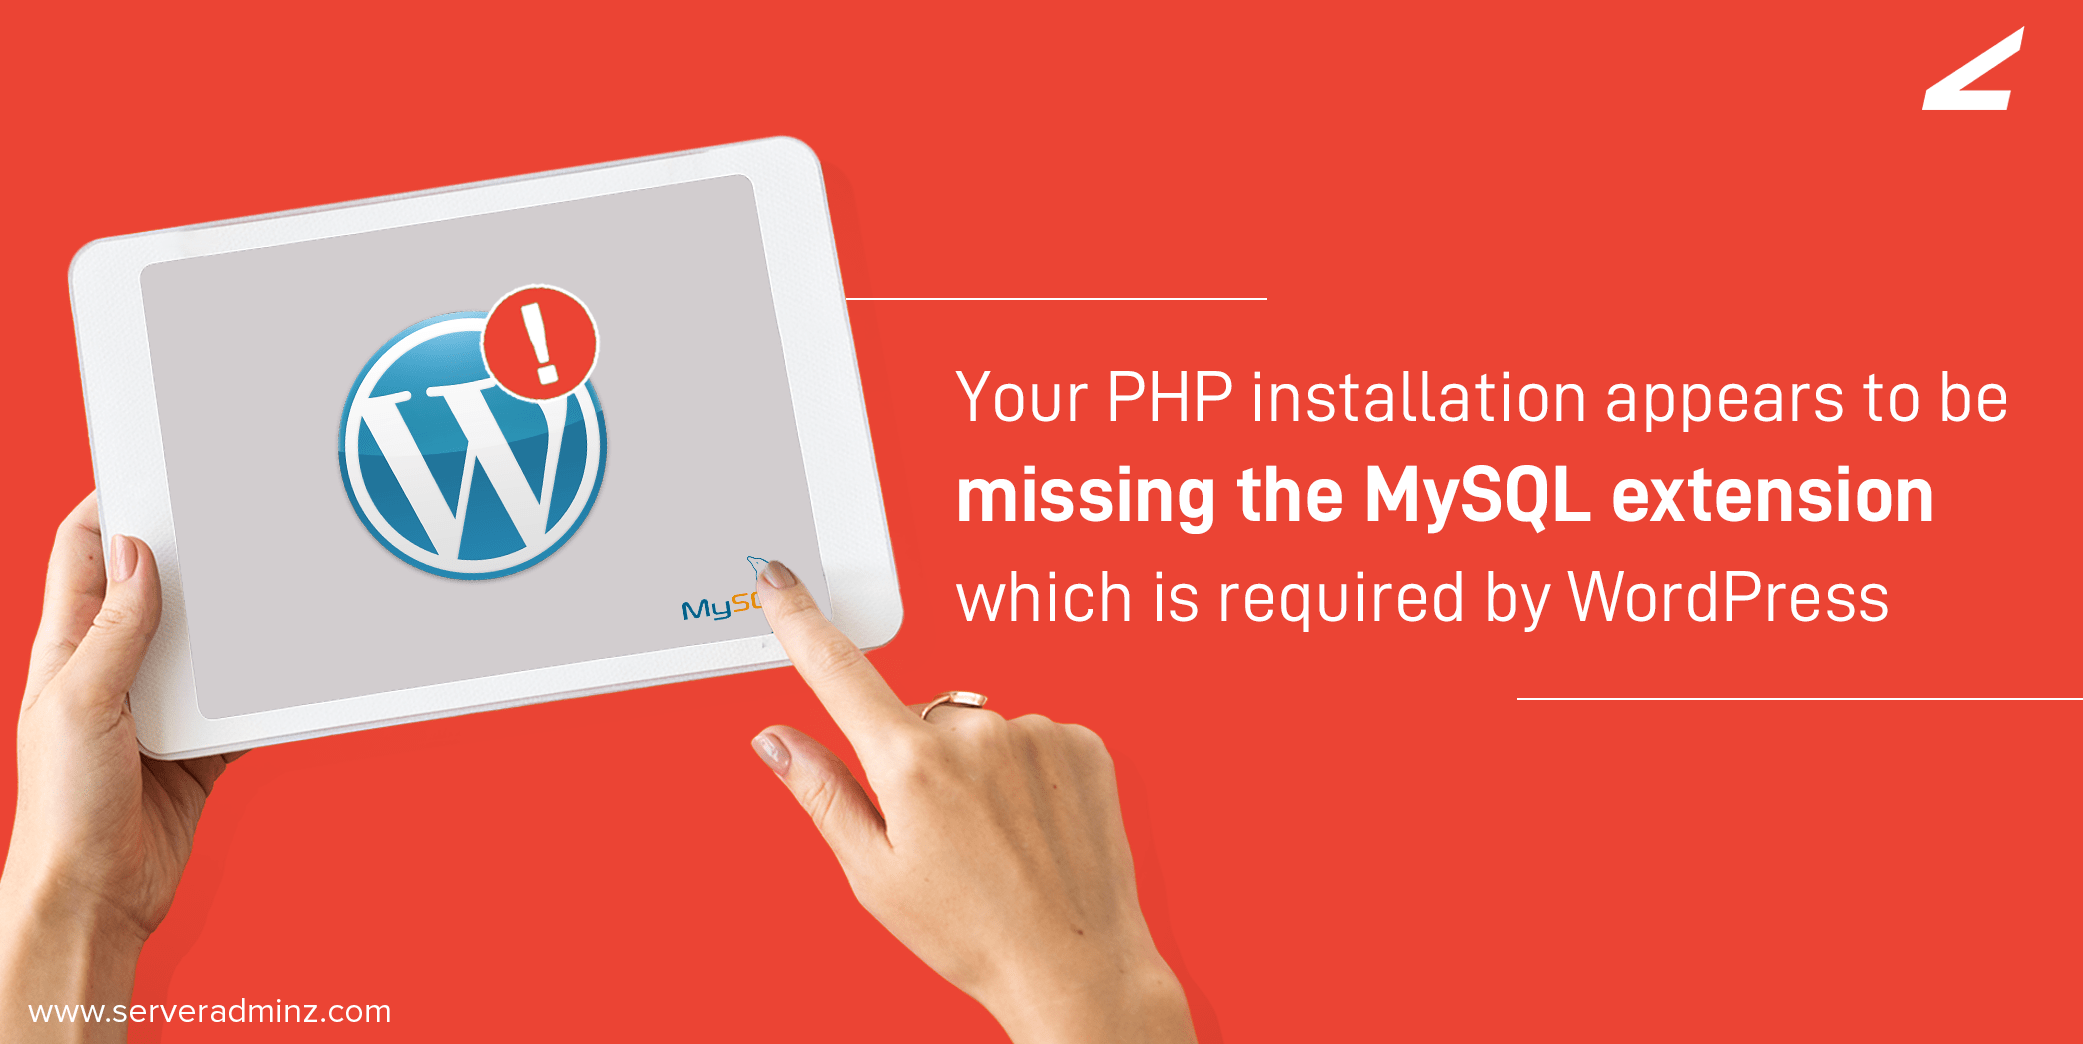 Your PHP installation appears to be missing the MySQL extension which is required by WordPress